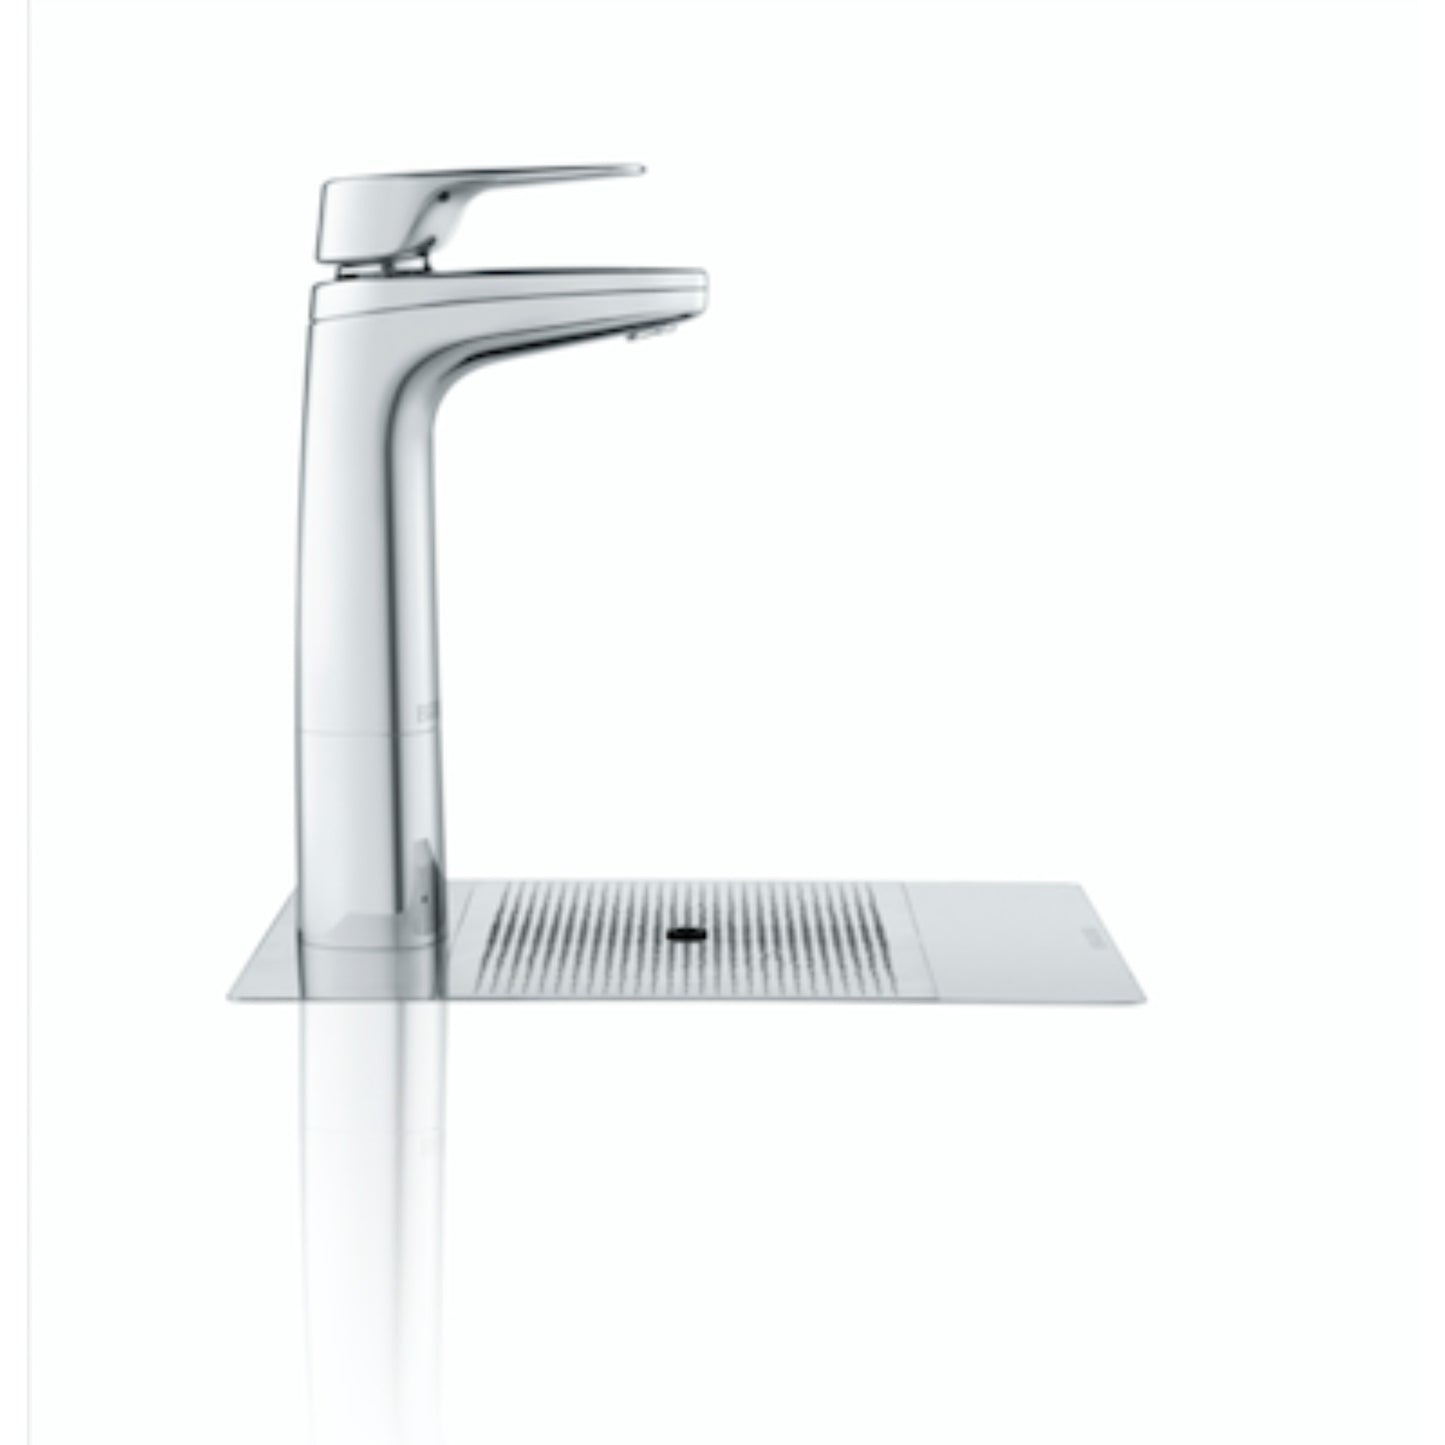 Billi XL Levered Tap with Riser & Drainage Font in Chrome